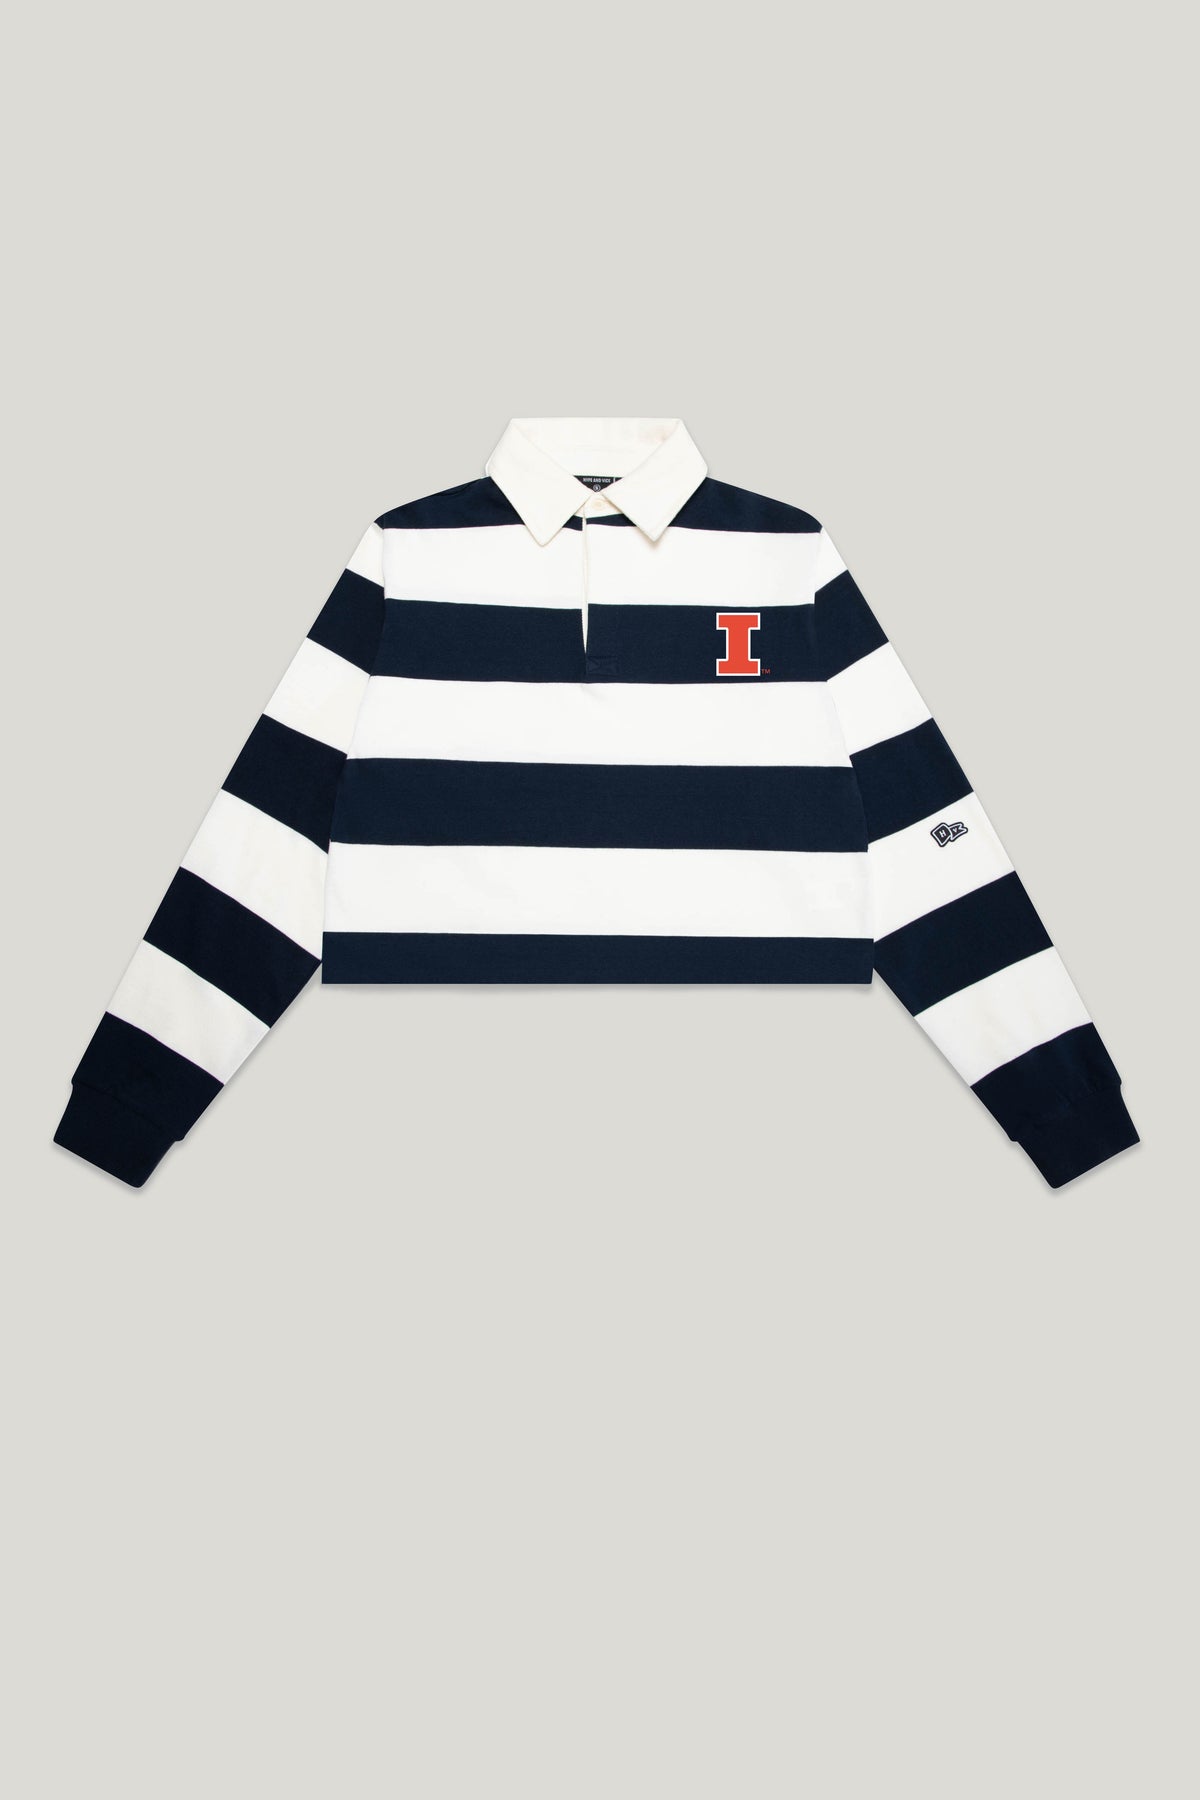 University of Illinois Rugby Top